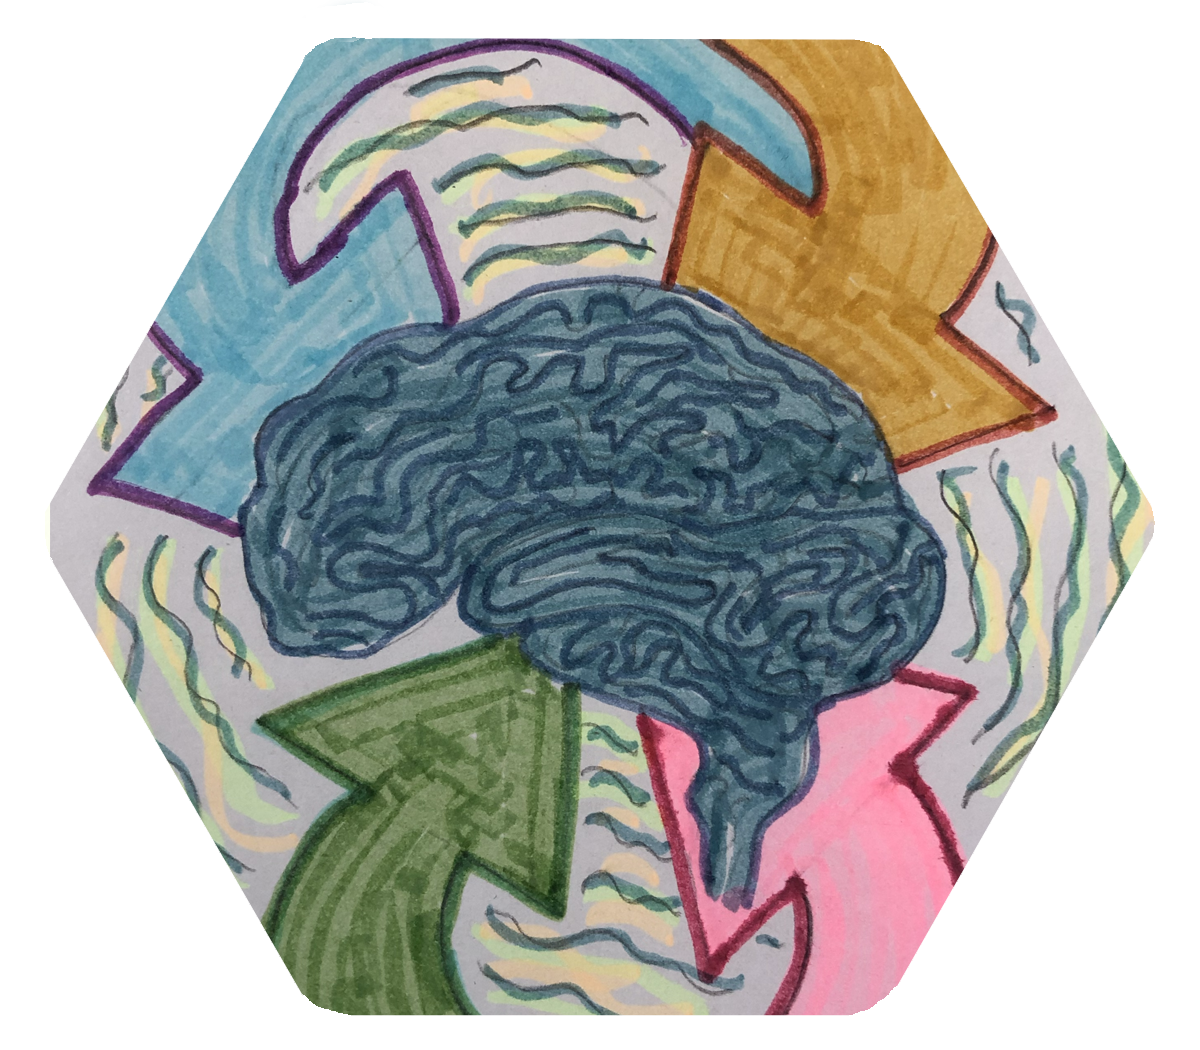 An image of a brain with colorful arrows going in it; decorative